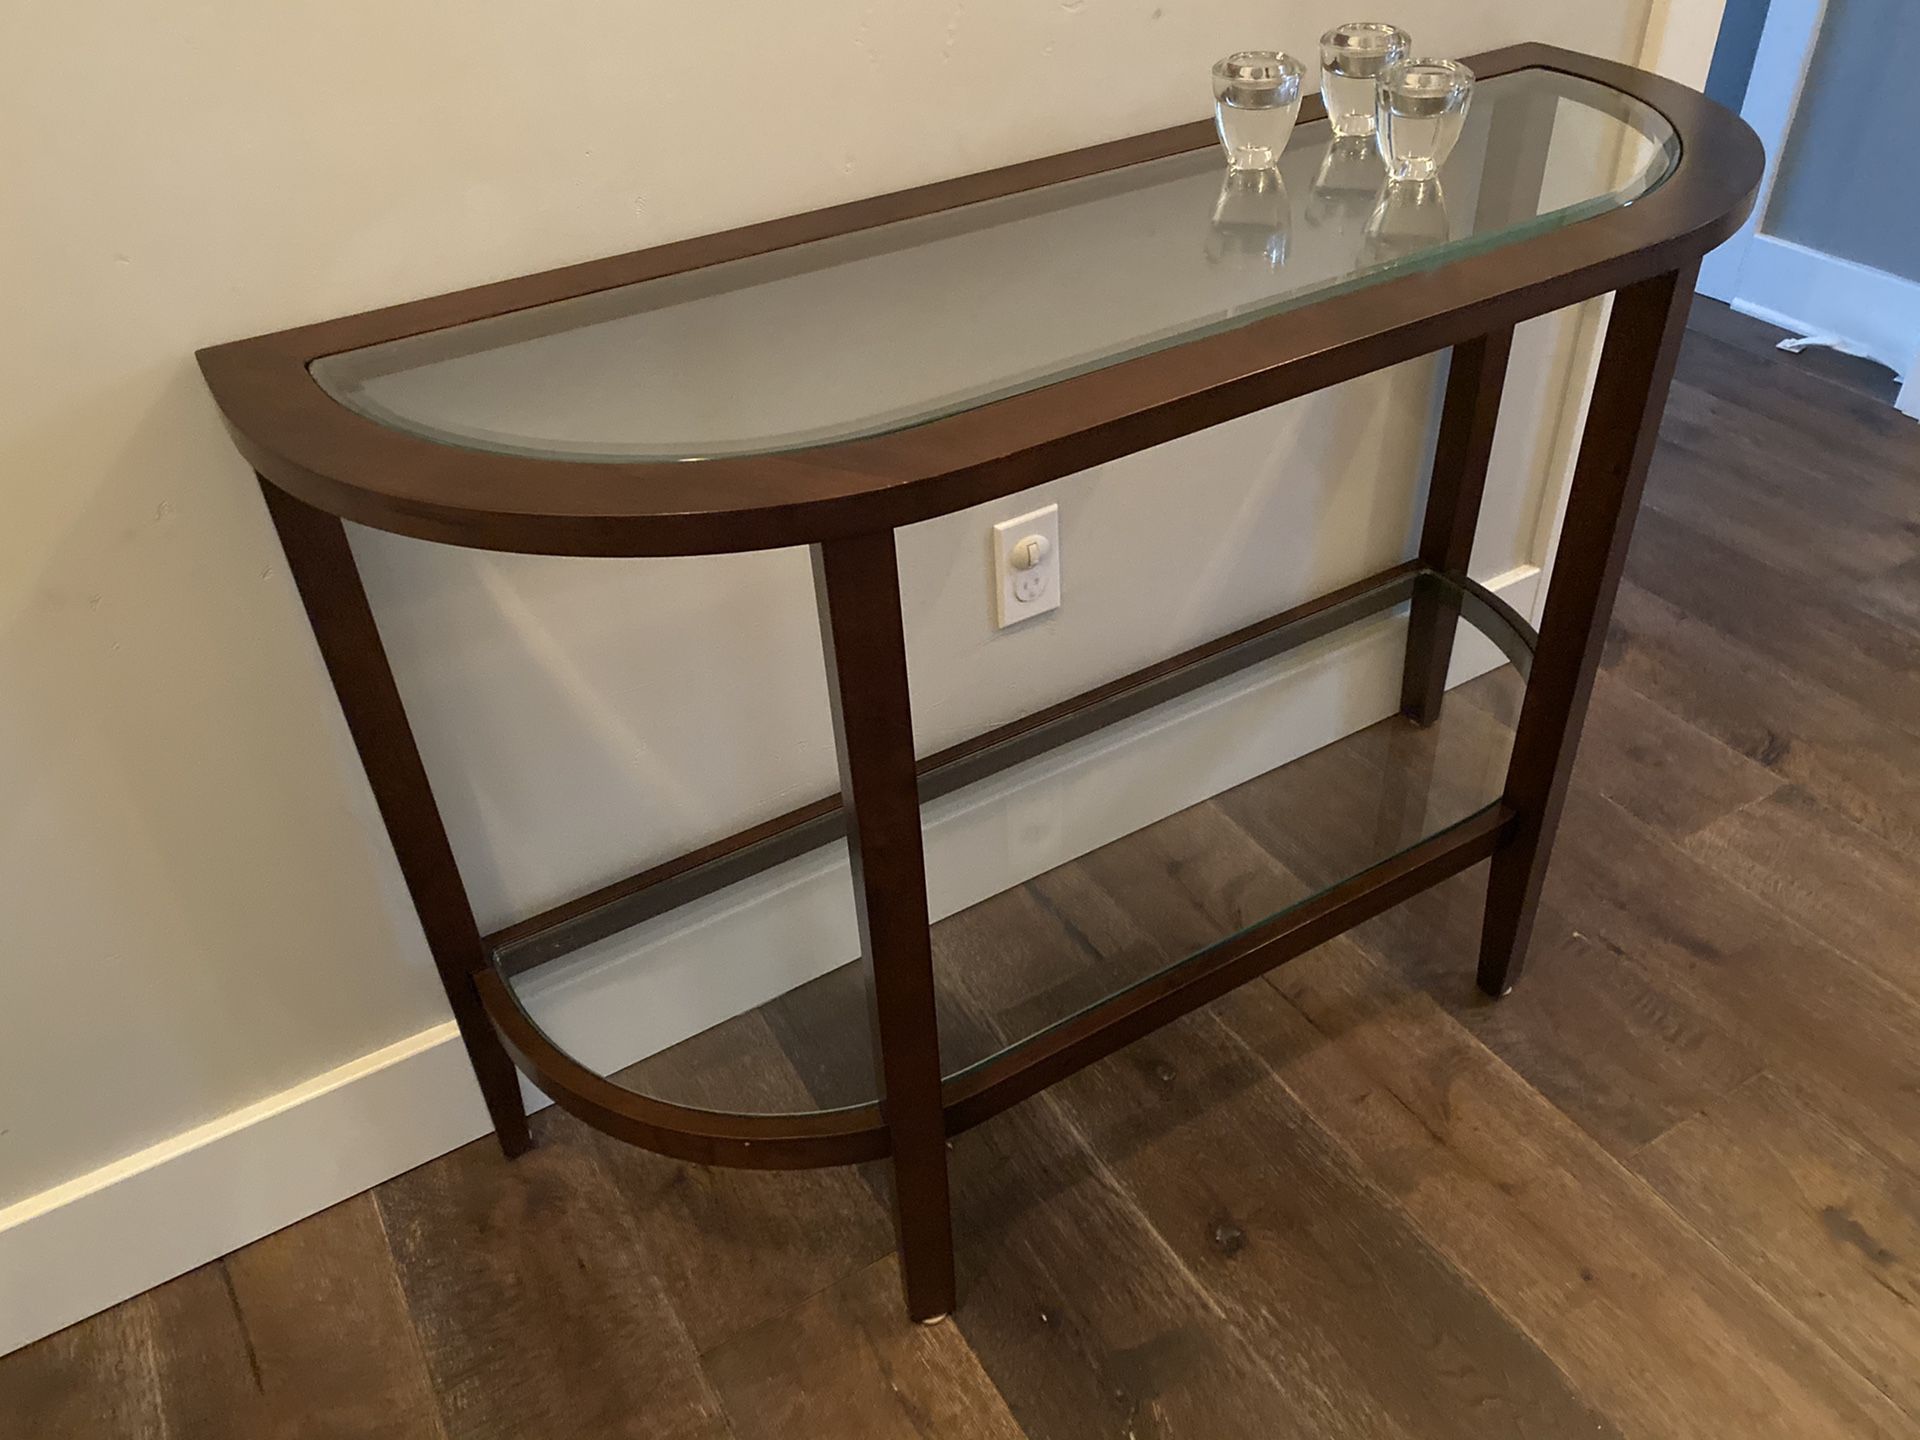 Walnut and glass console table